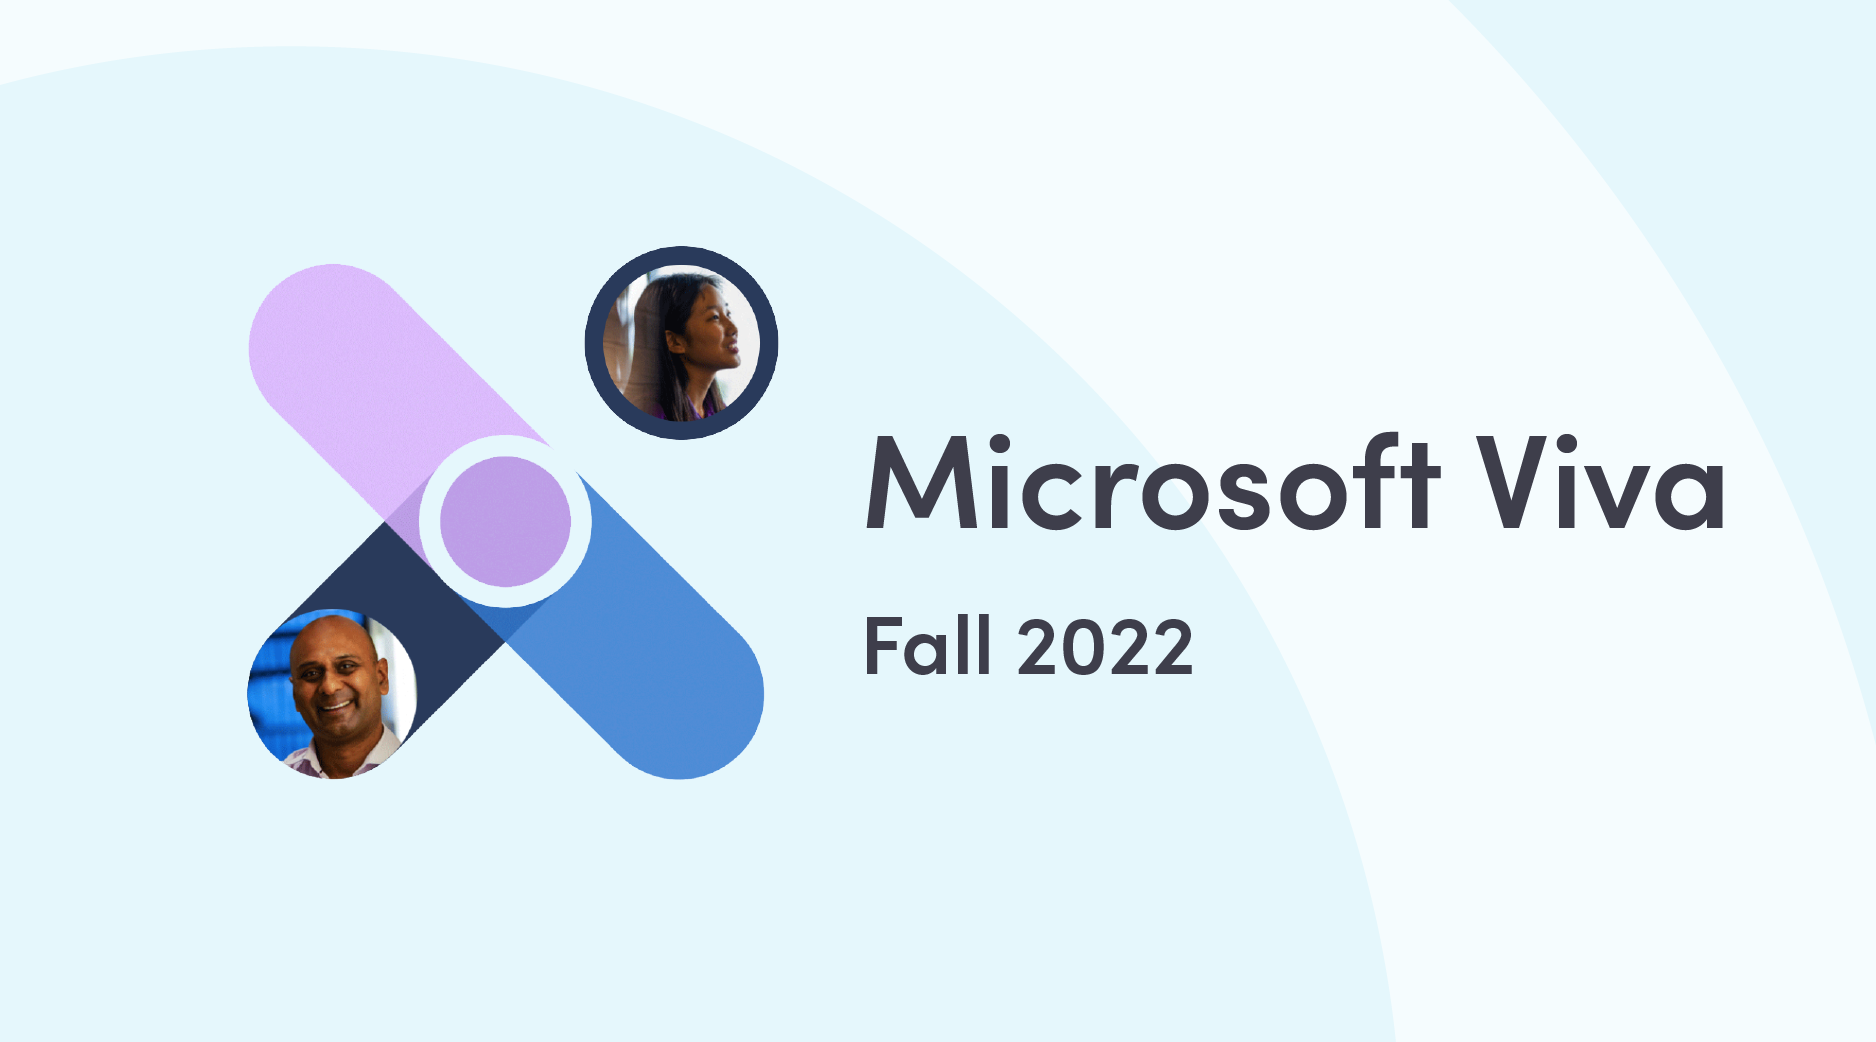 Updates to Microsoft Viva Fall 2022, Image includes viva logo and emphasizes Microsoft Viva Engage as a topic in the blog